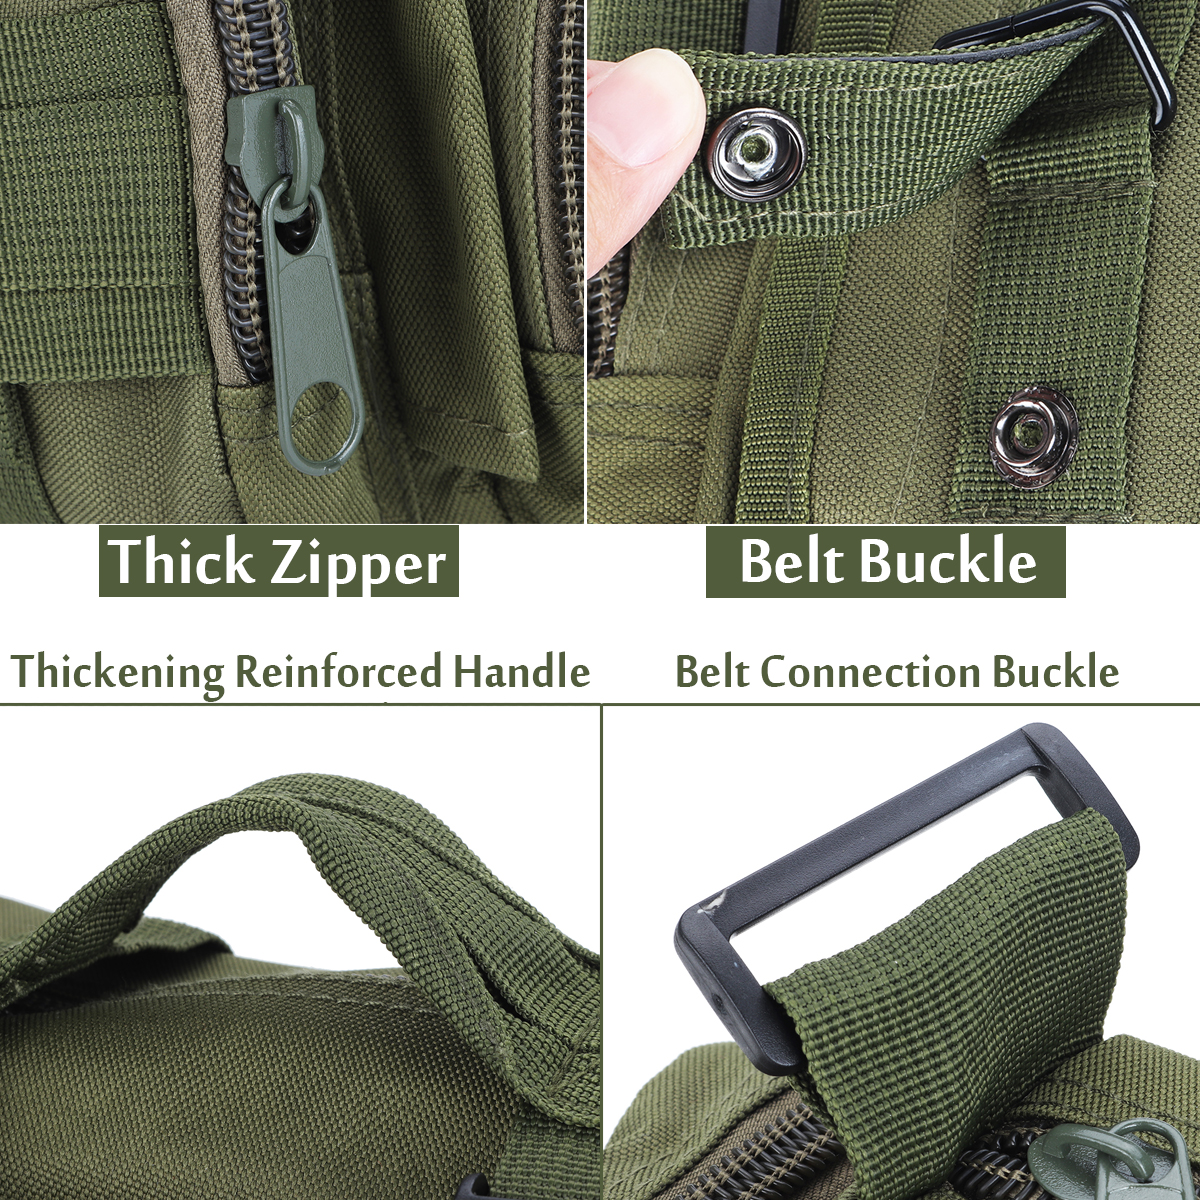 Multifunctional-Outdoor-Sports-Hiking-with-Zippers-Nylon-Oxford-Cloth-Tactical-Shoulder-Bag-Waist-Pa-1825563-25